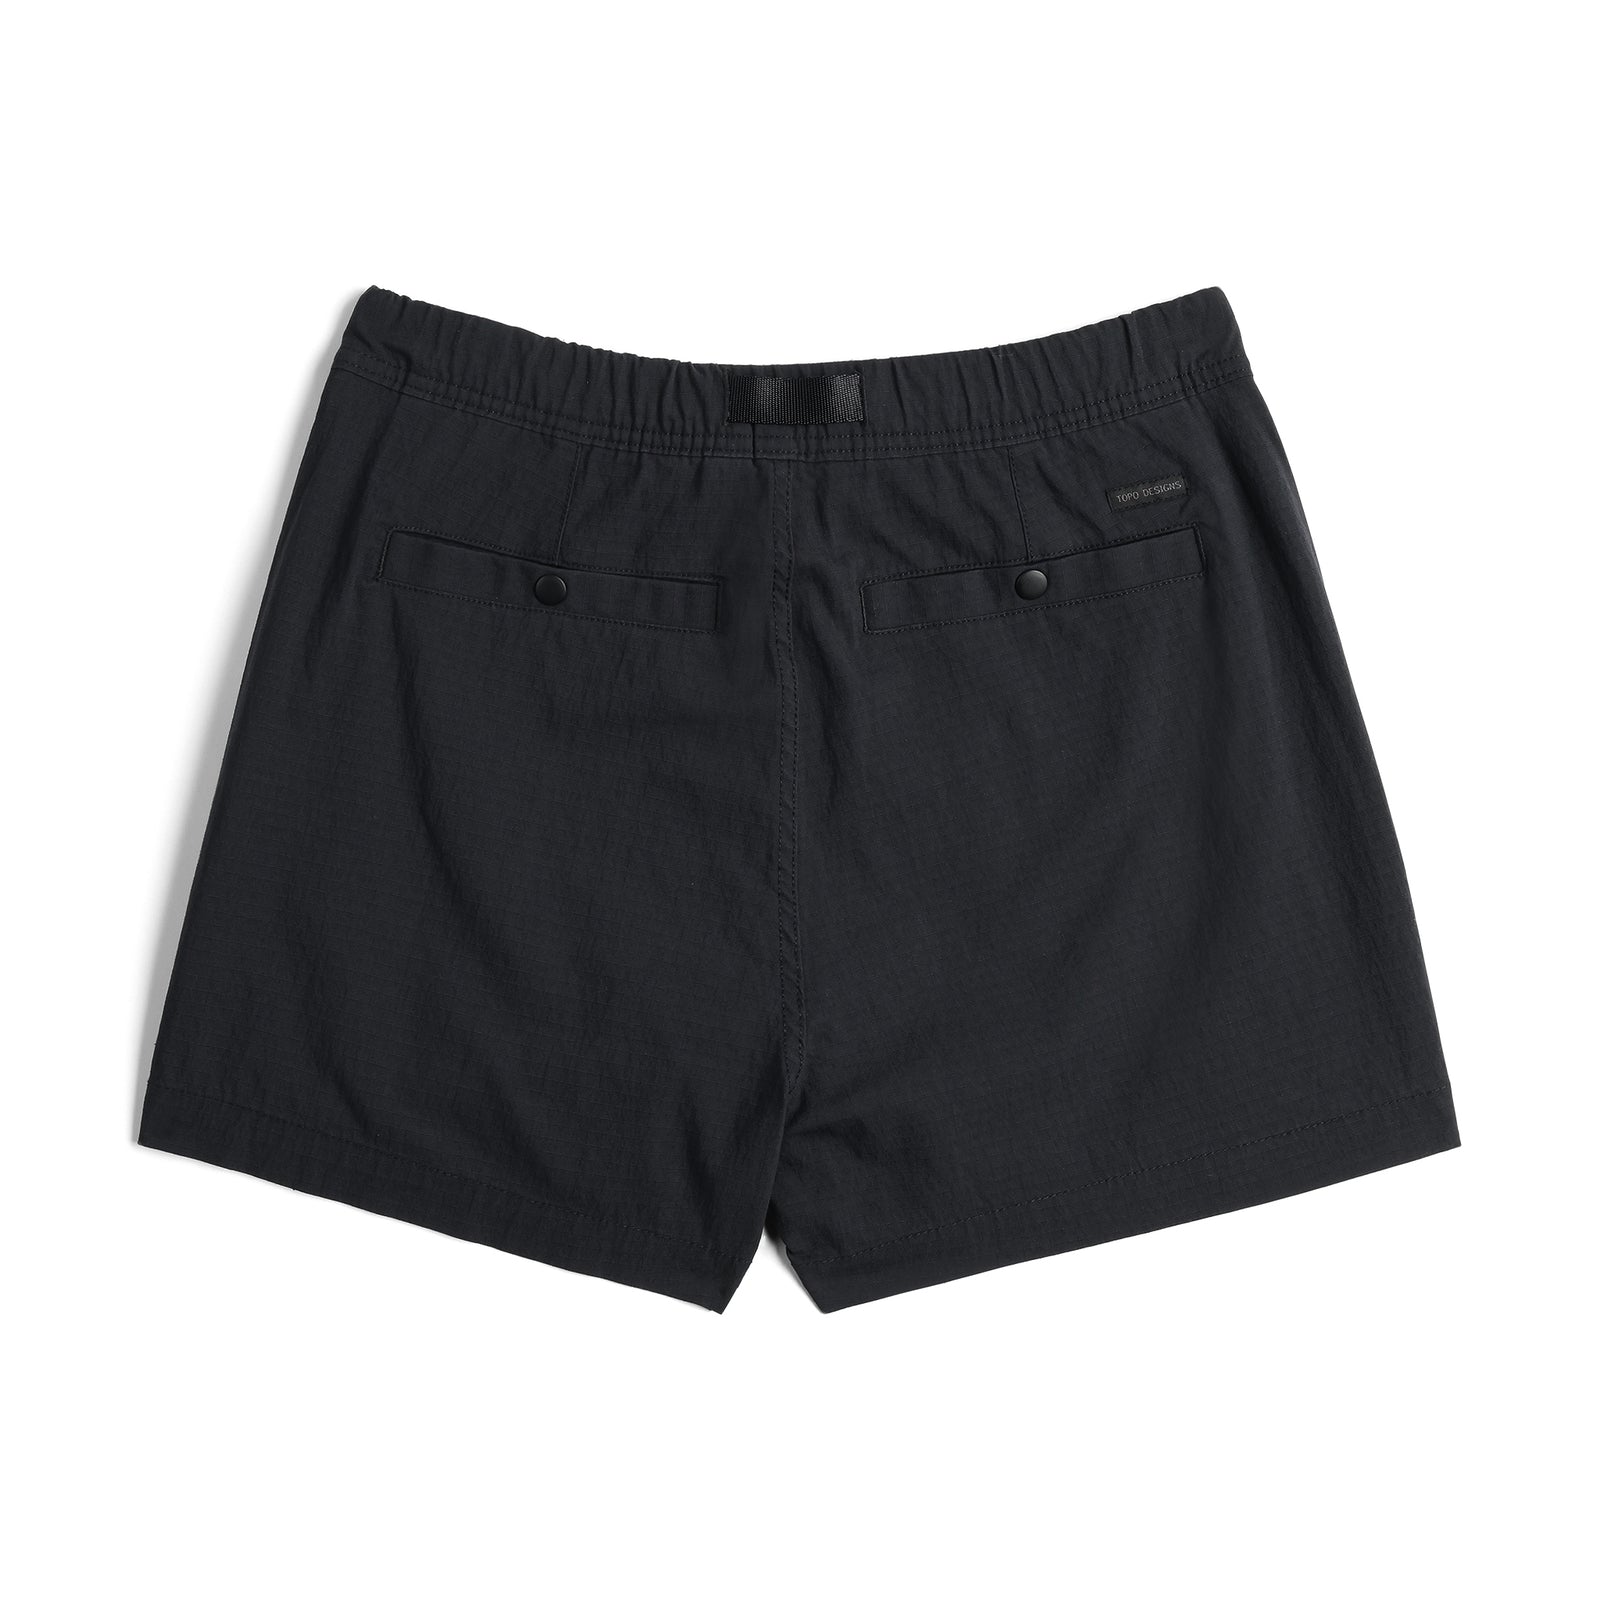 Back View of Topo Designs Mountain Short Ripstop - Women's in "Black"